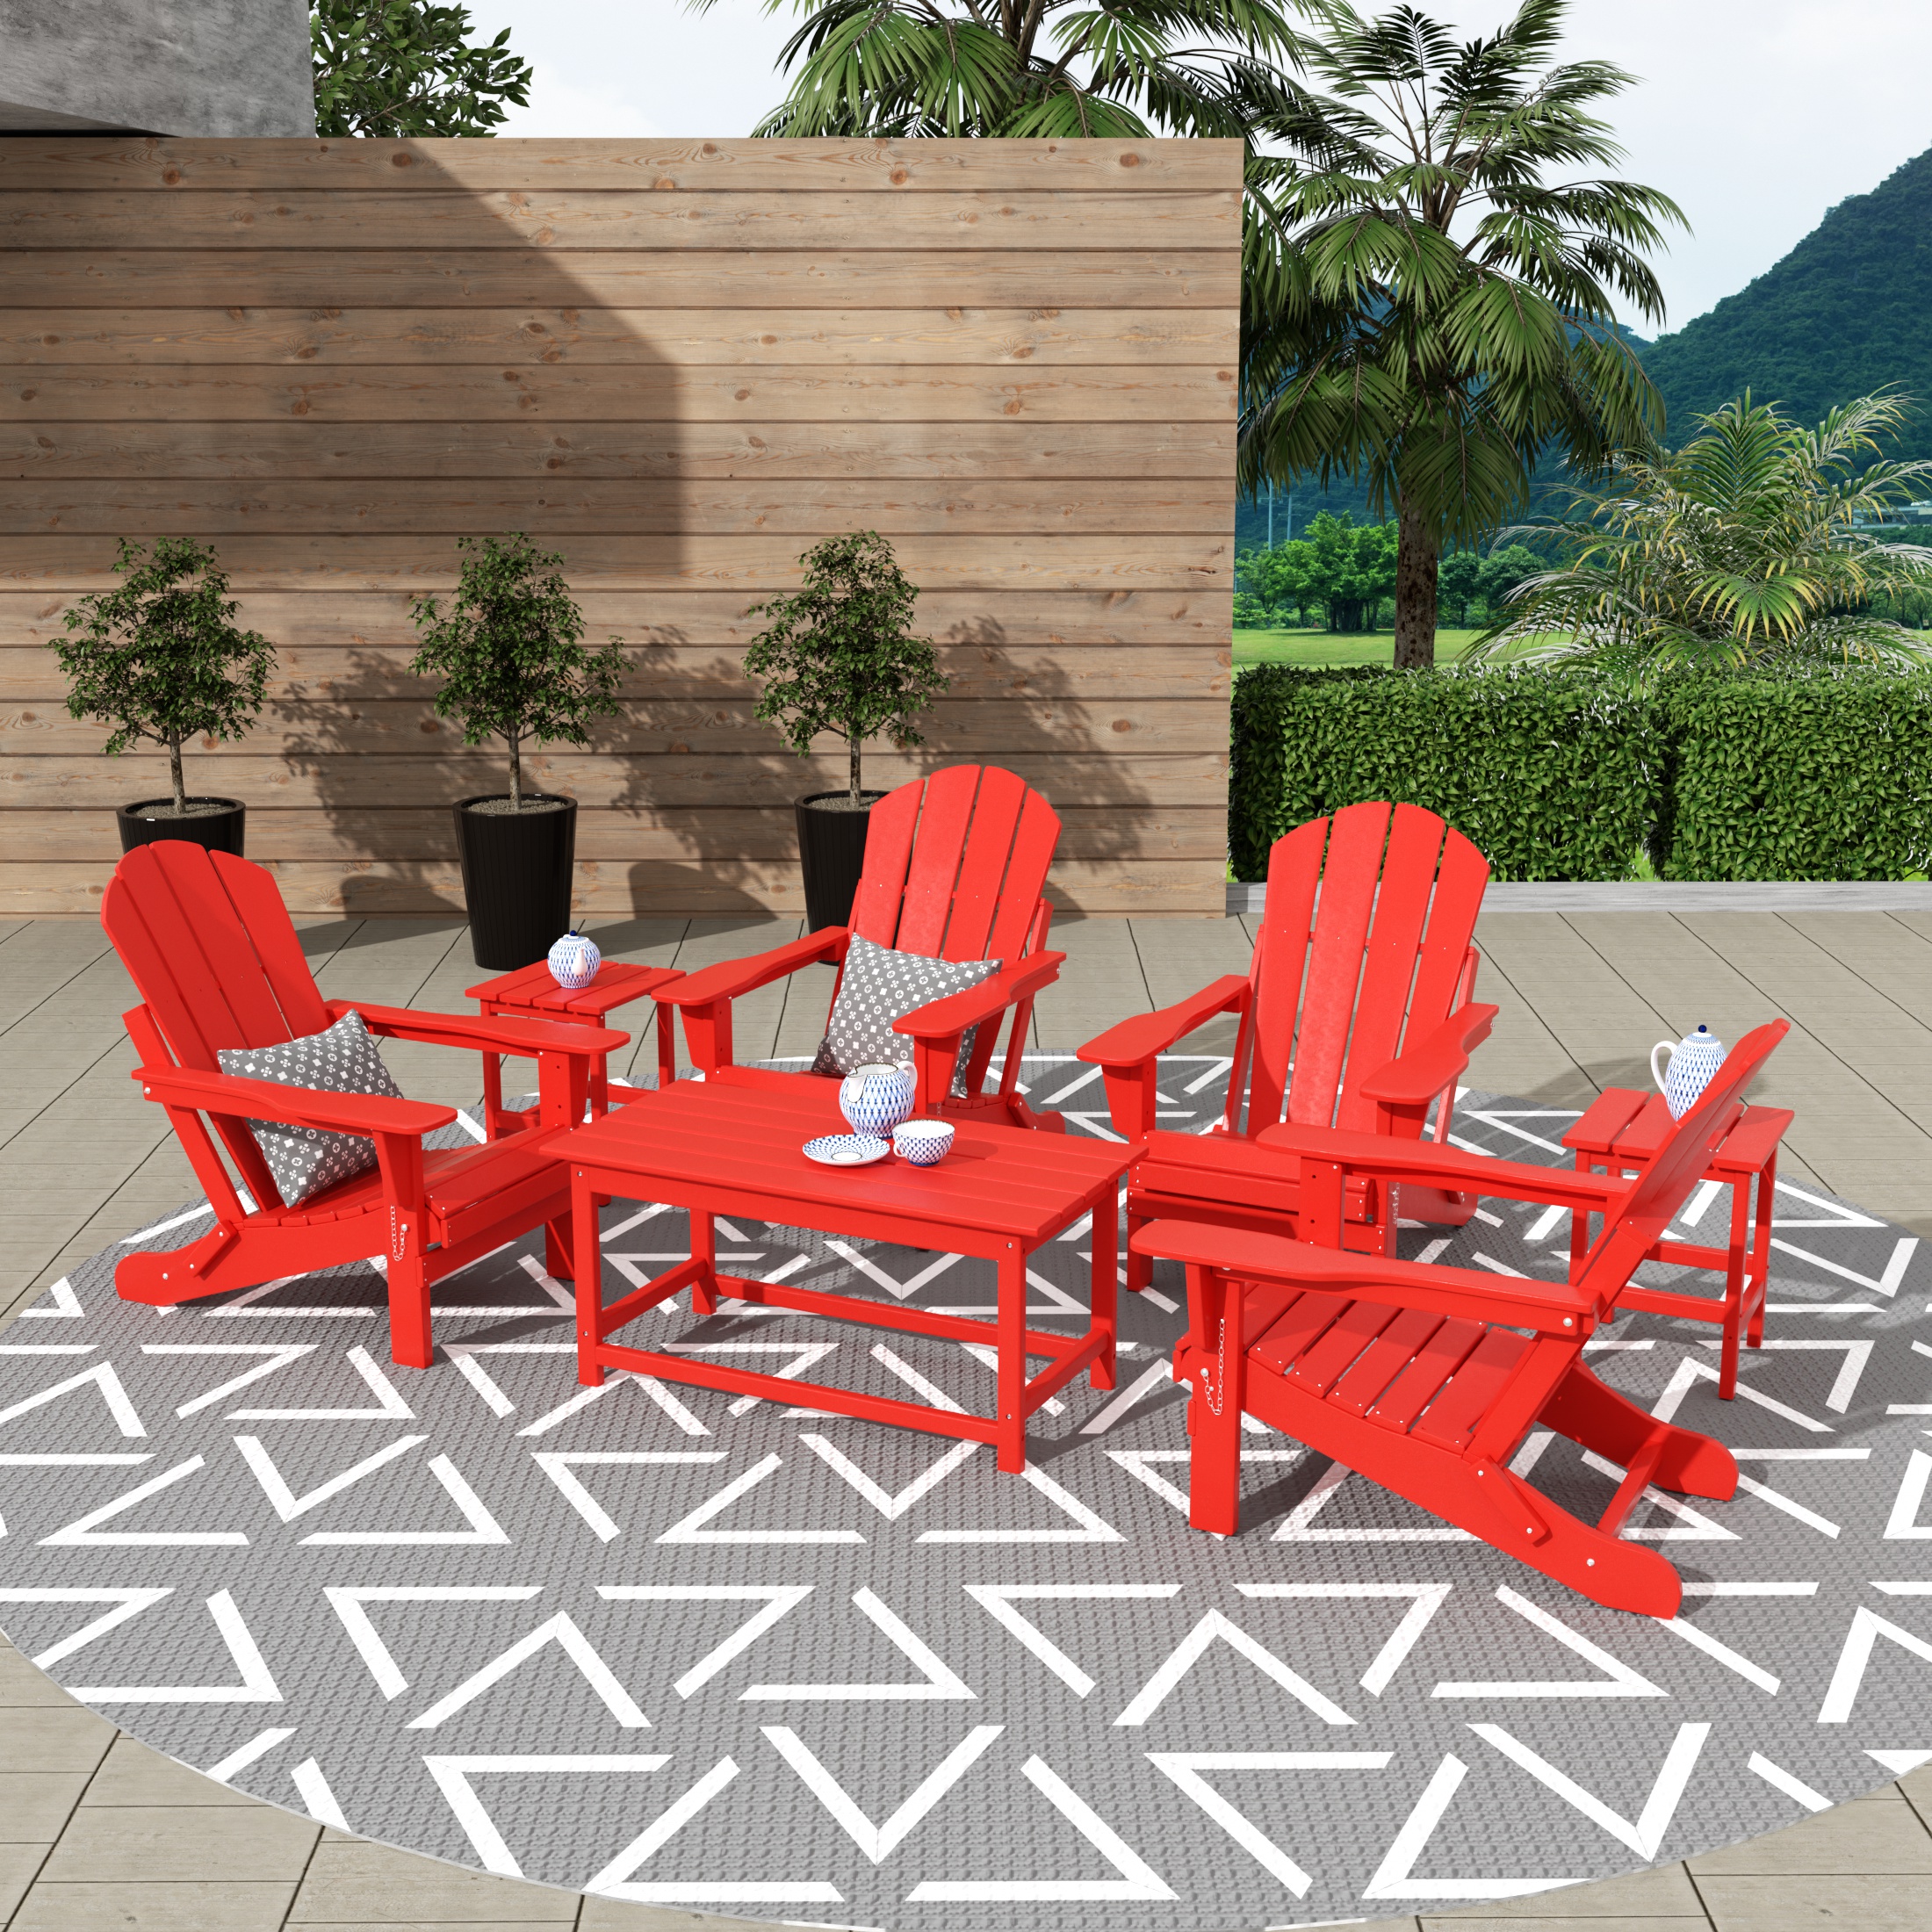 WestinTrends Malibu 7-Pieces Outdoor Patio Furniture Set, All Weather Outdoor Seating Plastic Adirondack Chair Set of 4, Coffee Table and 2 Side Table, Red - image 2 of 7